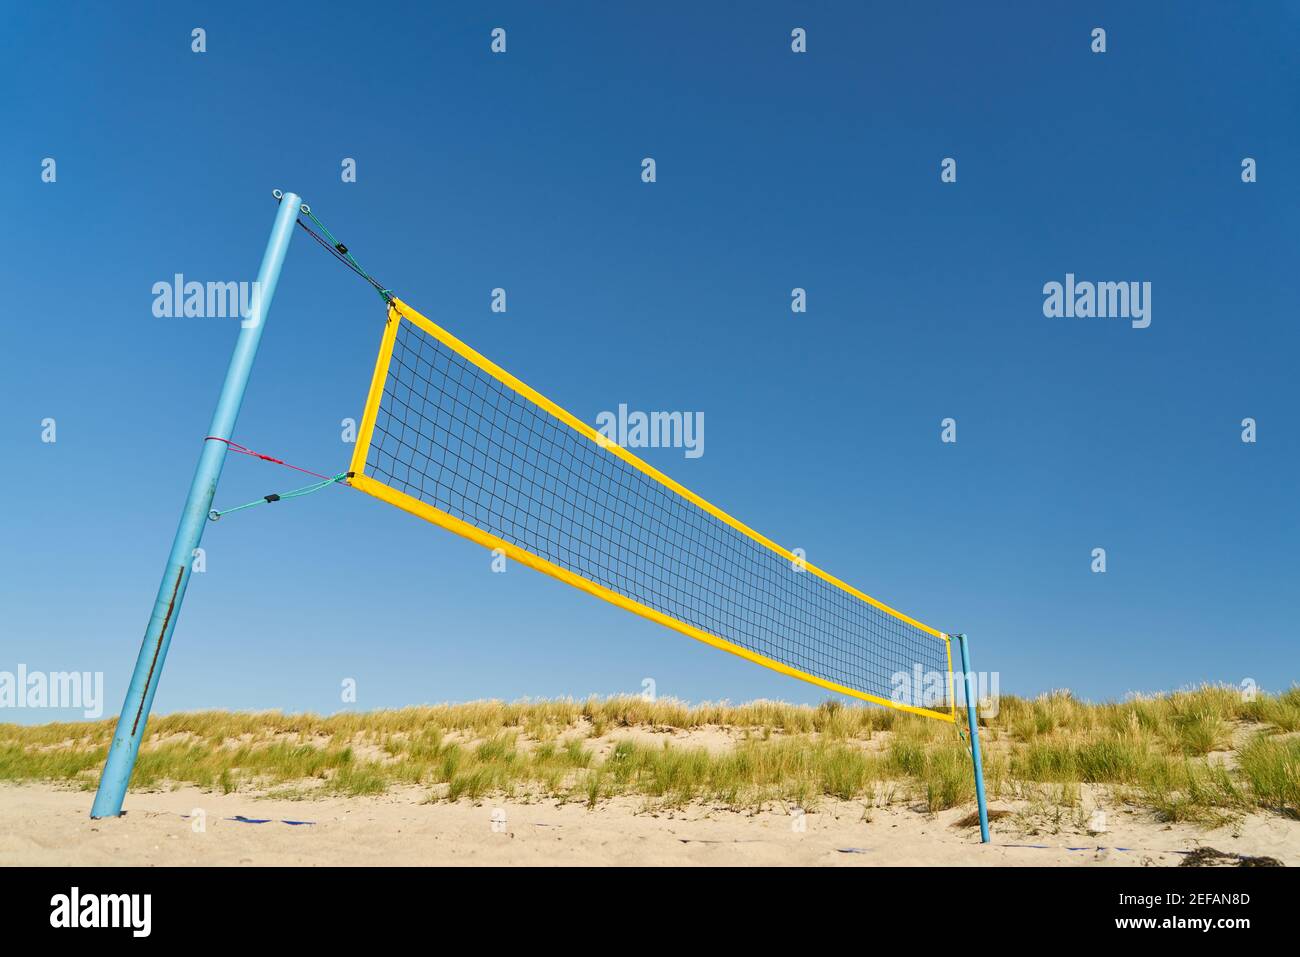 Net on volleyball field on the beach in summer with a blue sky Stock Photo